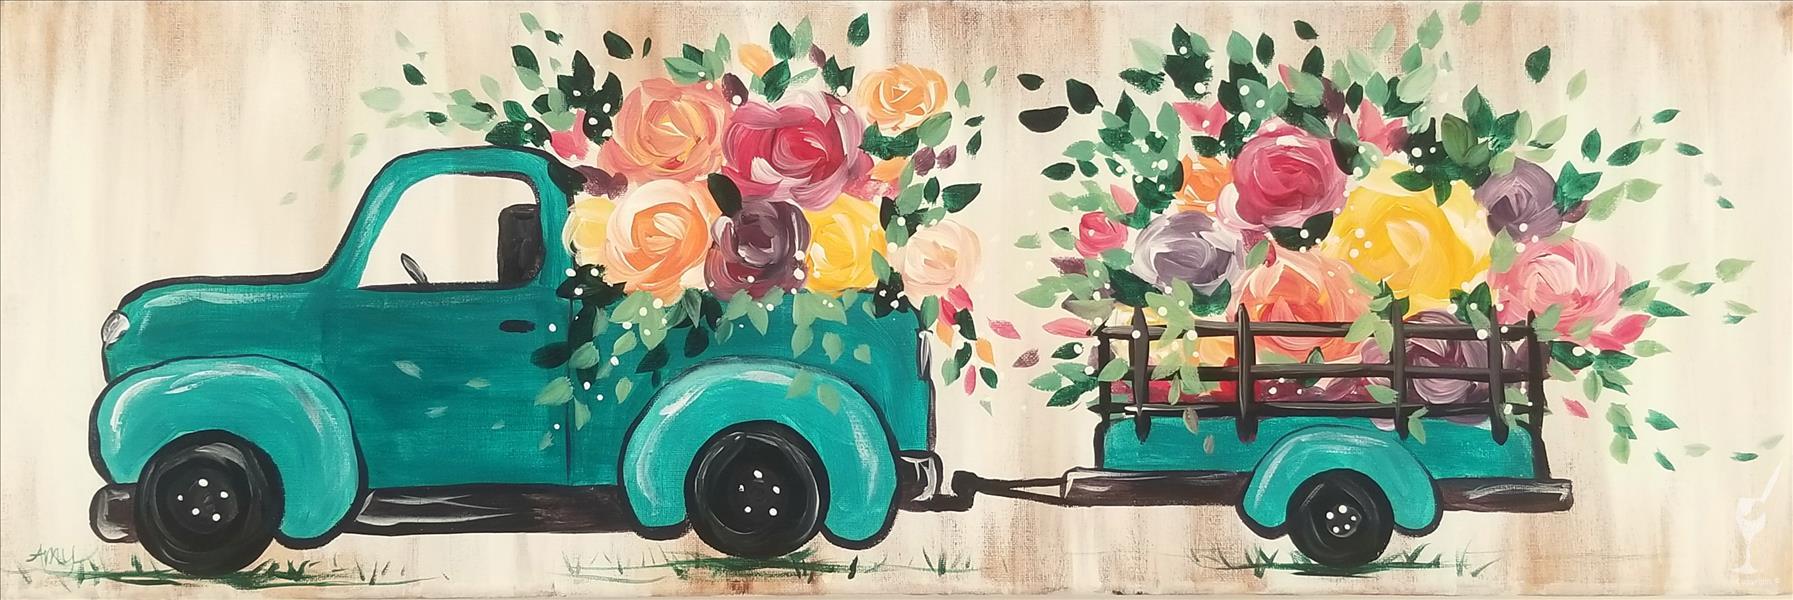 RUSTIC HAULIN' SPRING TRUCK- Afternoon Art Party